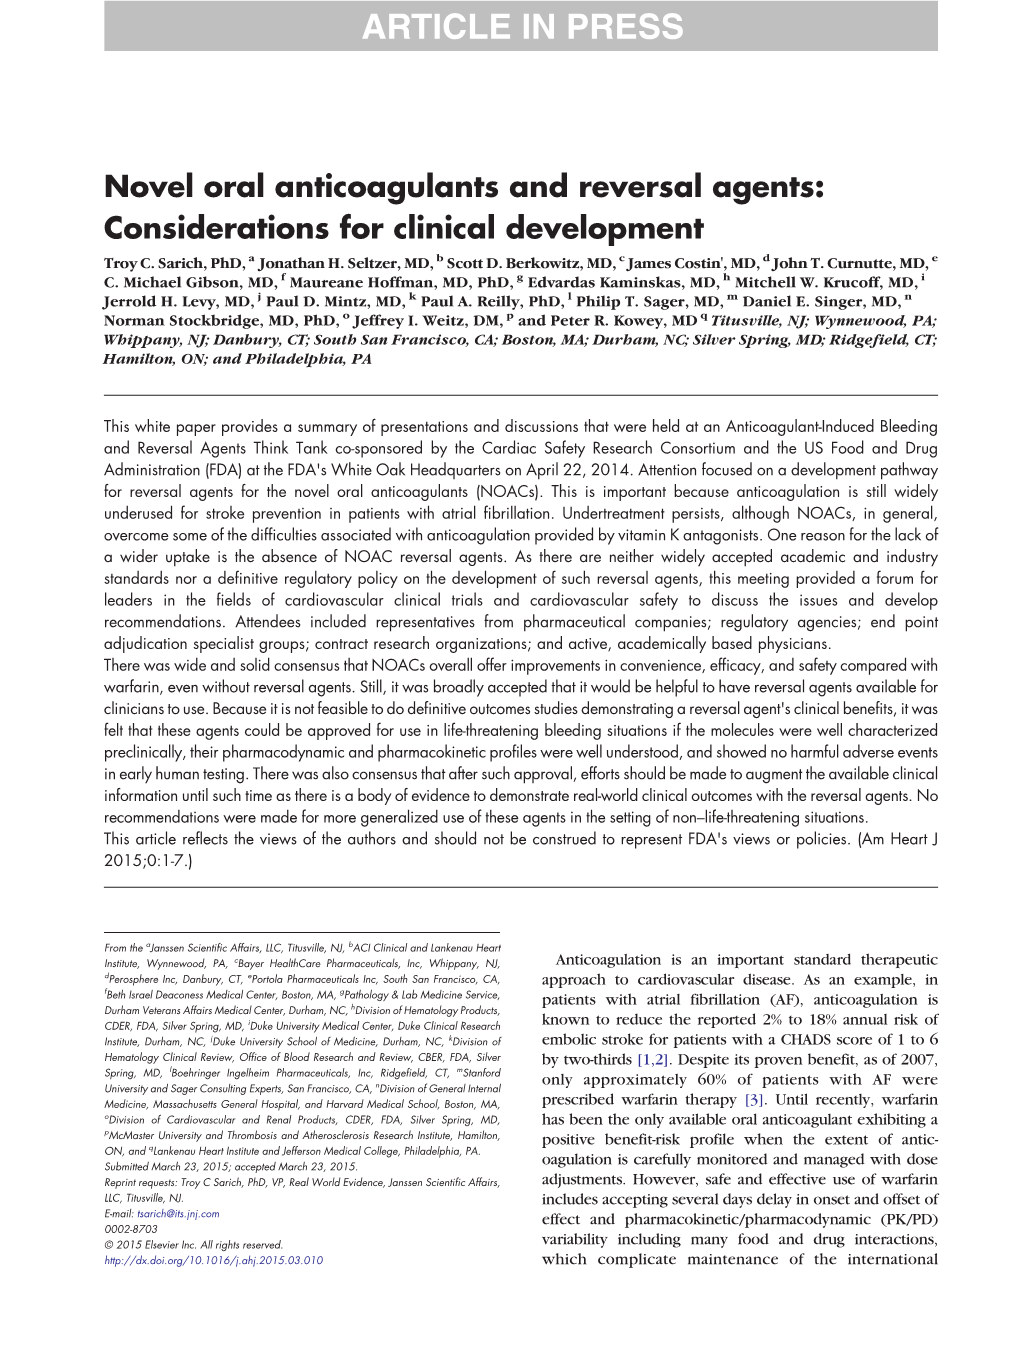 Novel Oral Anticoagulants and Reversal Agents: Considerations for Clinical Development Troy C